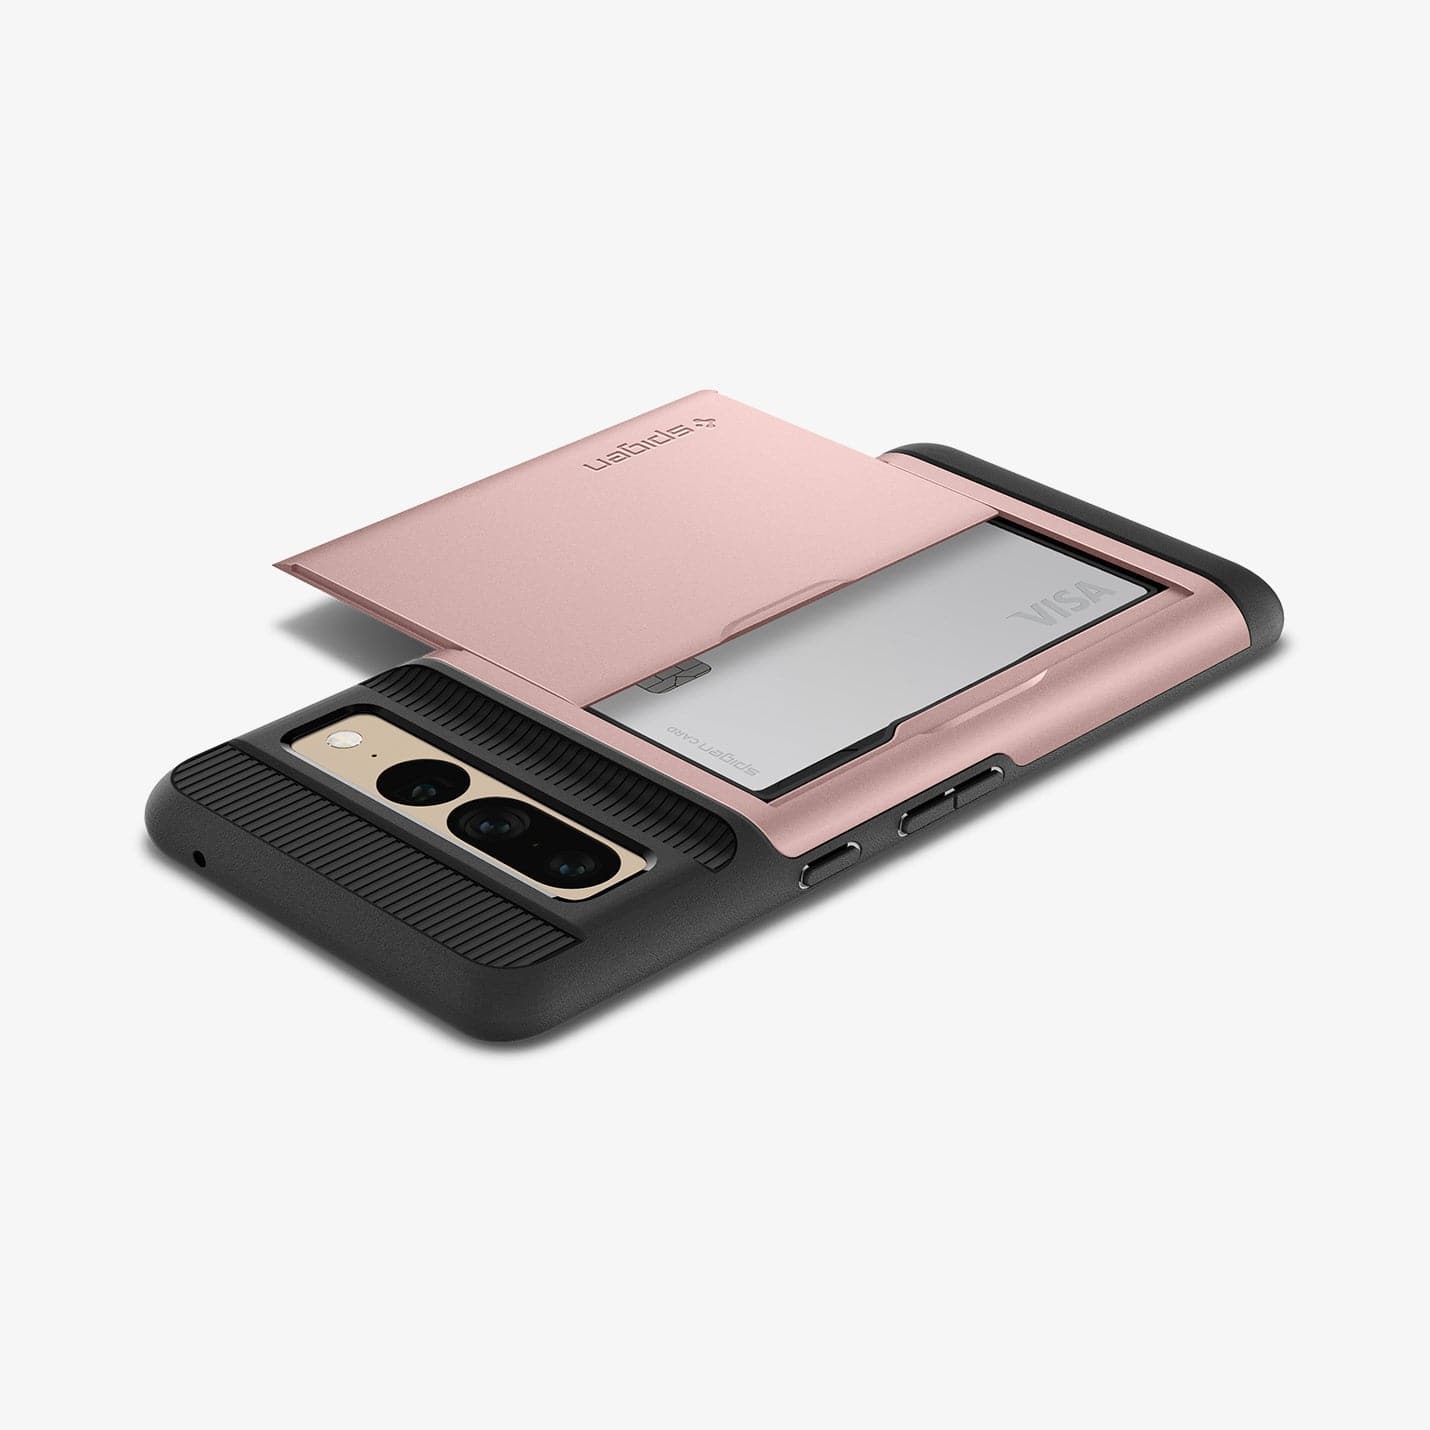 ACS04732 - Pixel 7 Pro Case Slim Armor CS in rose gold showing the back with card in slot and device laying flat